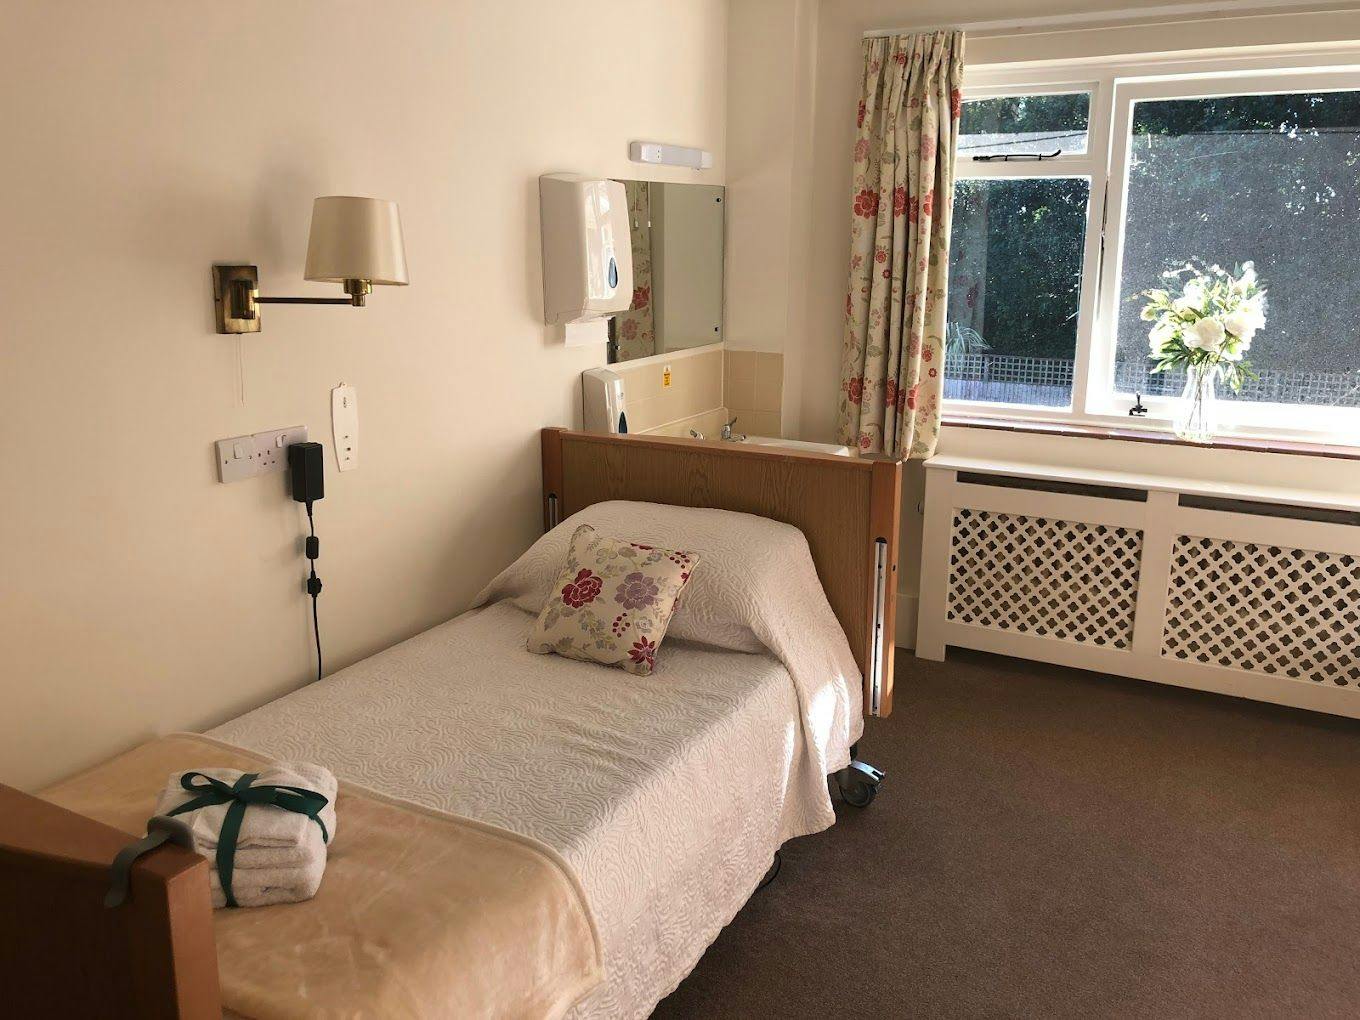 Bedroom of Castle Dene care home in Bournemouth, Hampshire